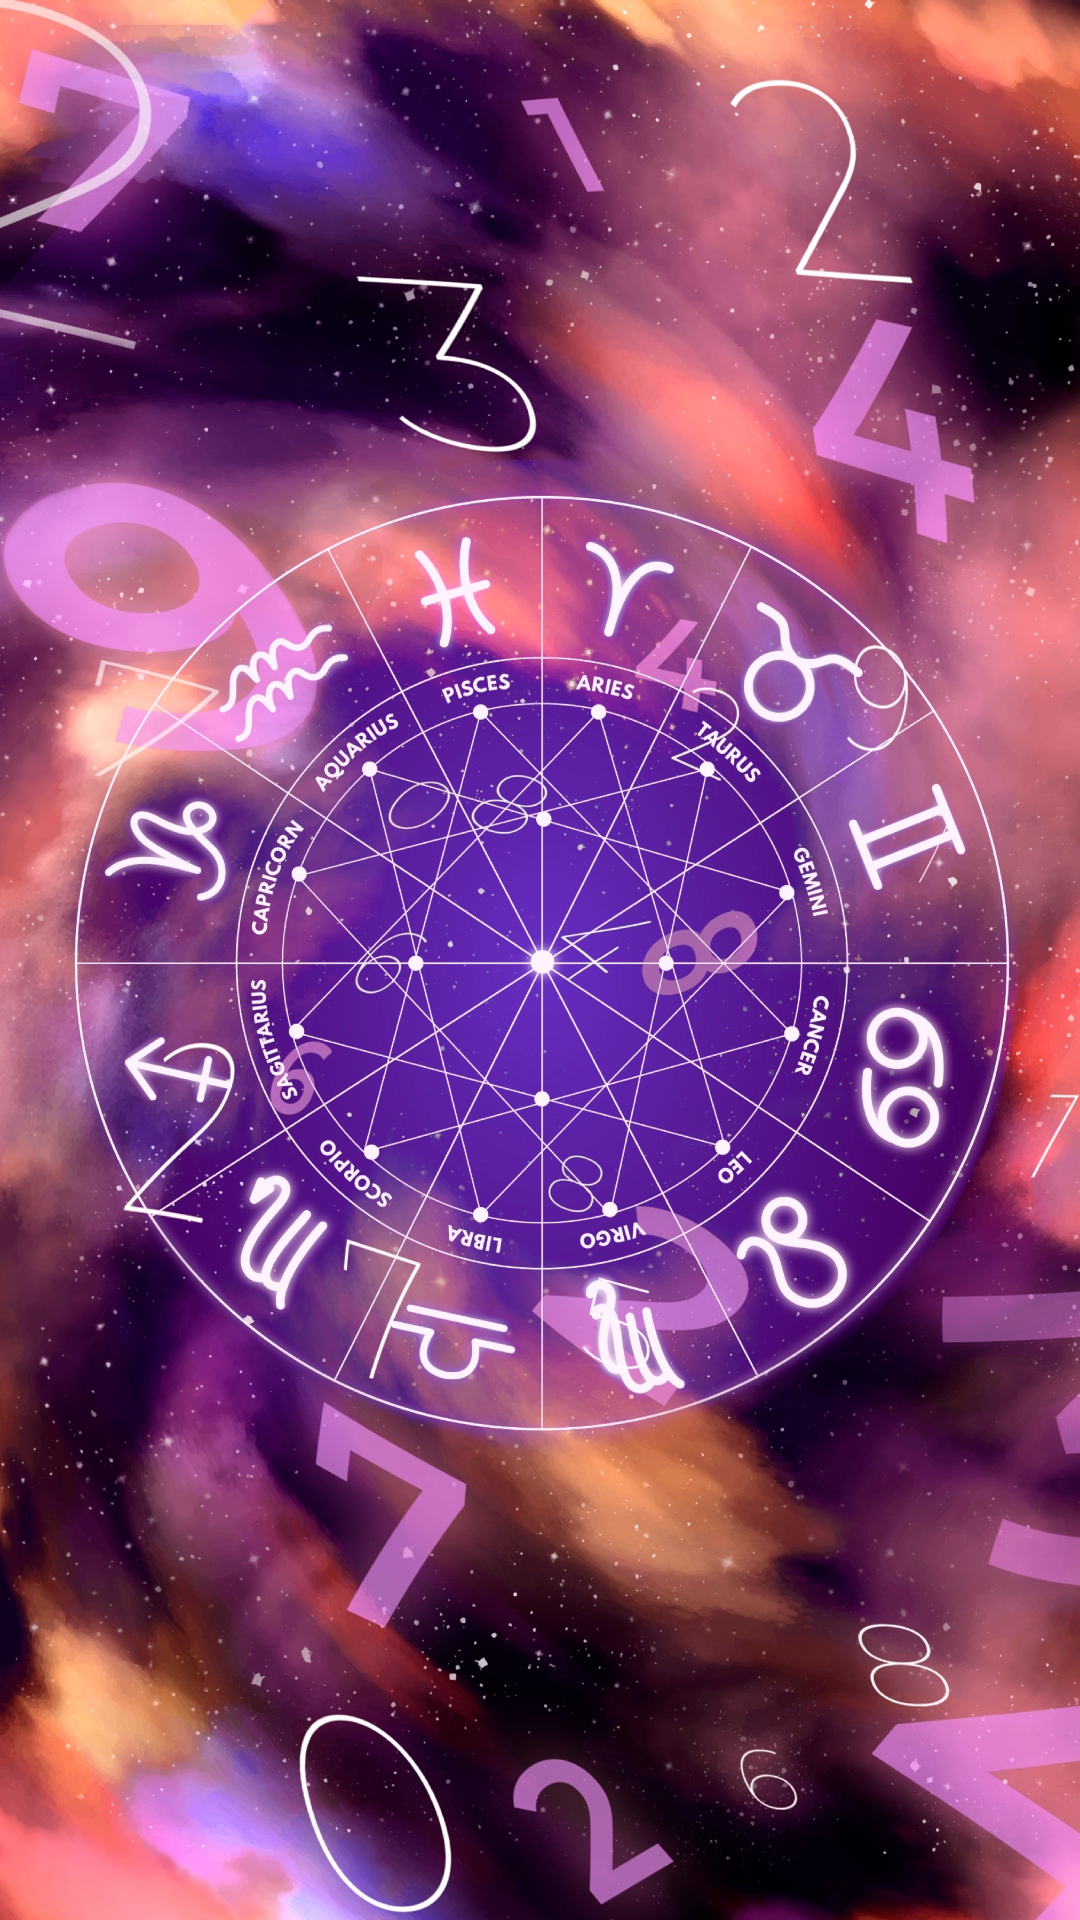 Know lucky colour and numbers for all zodiac signs in your horoscope for September 29